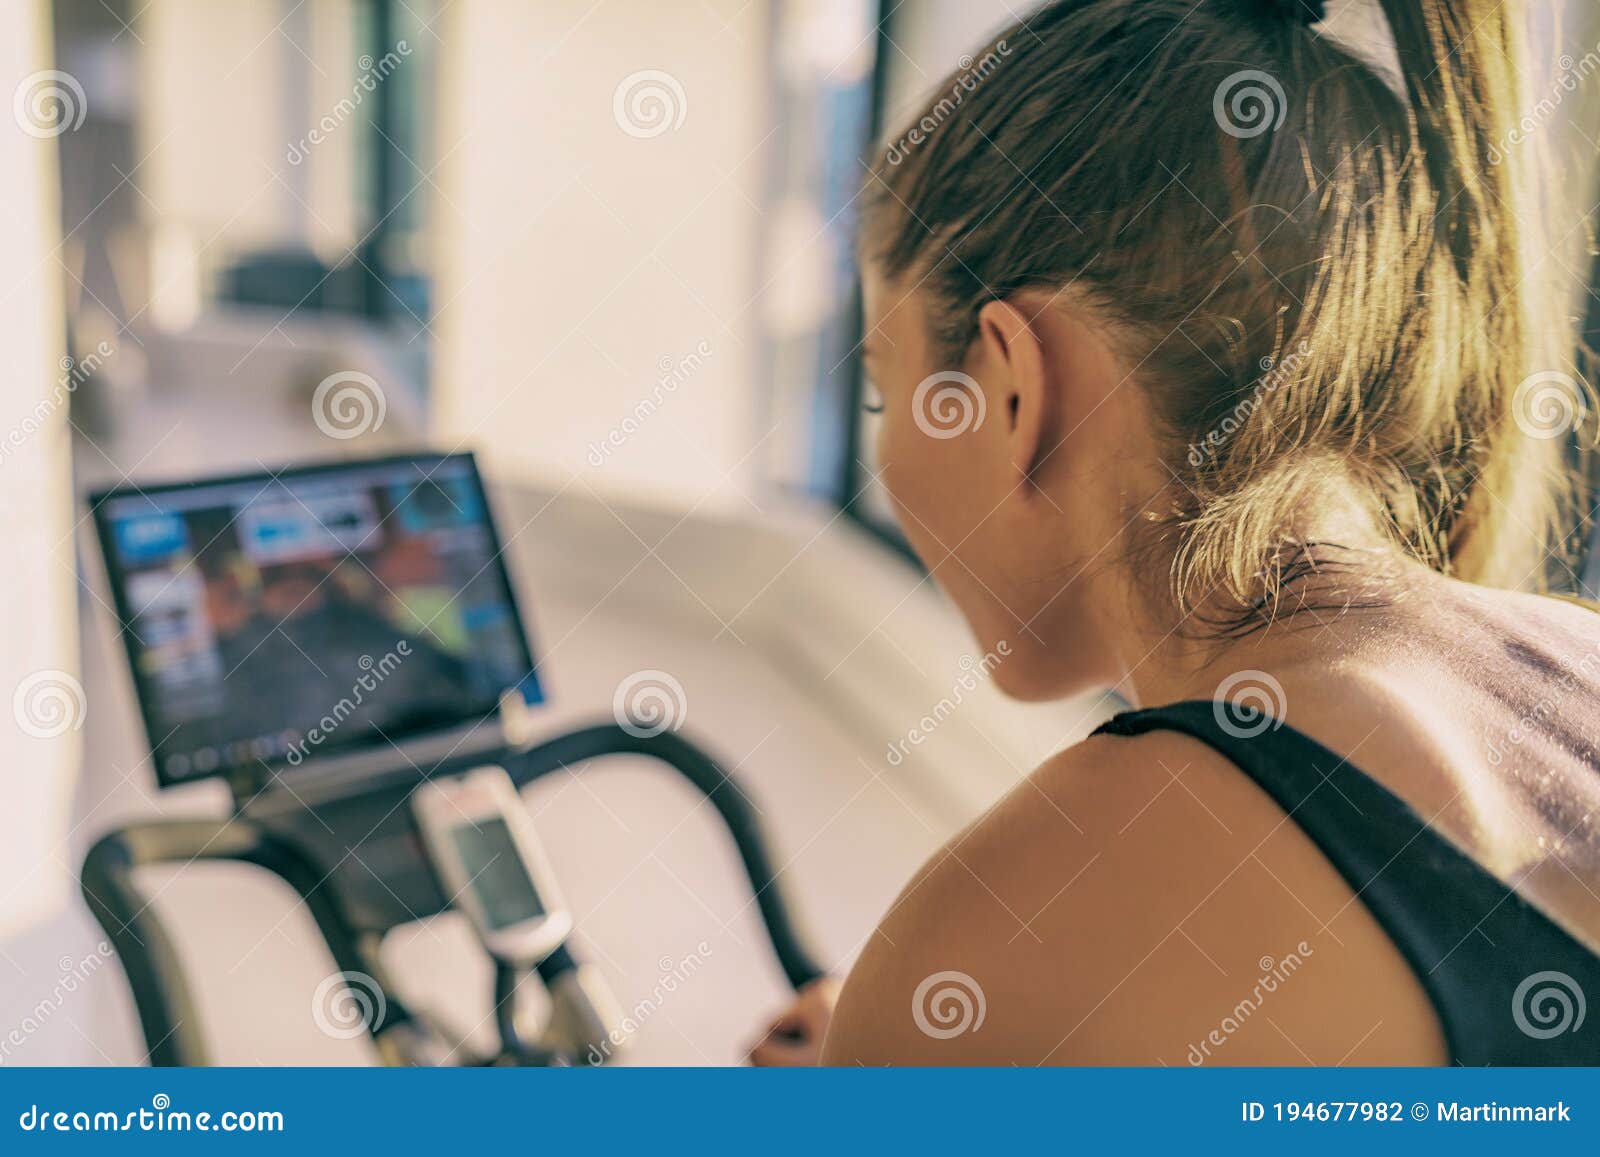 Smart Fitness Home Workout Biking Screen with Online Classes Woman Training on Stationary Bike Equipment Indoors for Stock Photo